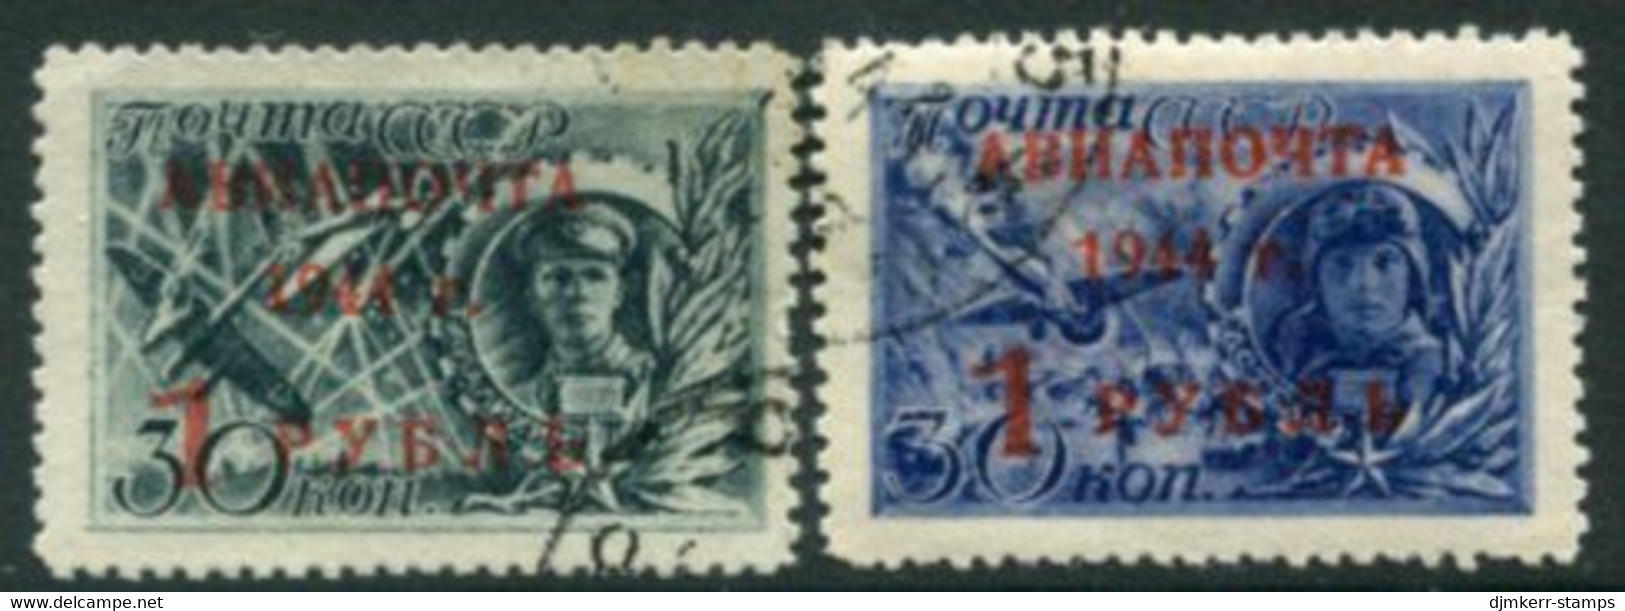 SOVIET UNION 1944 Air Overprint On Heroes Used.  Michel 899-900 - Used Stamps